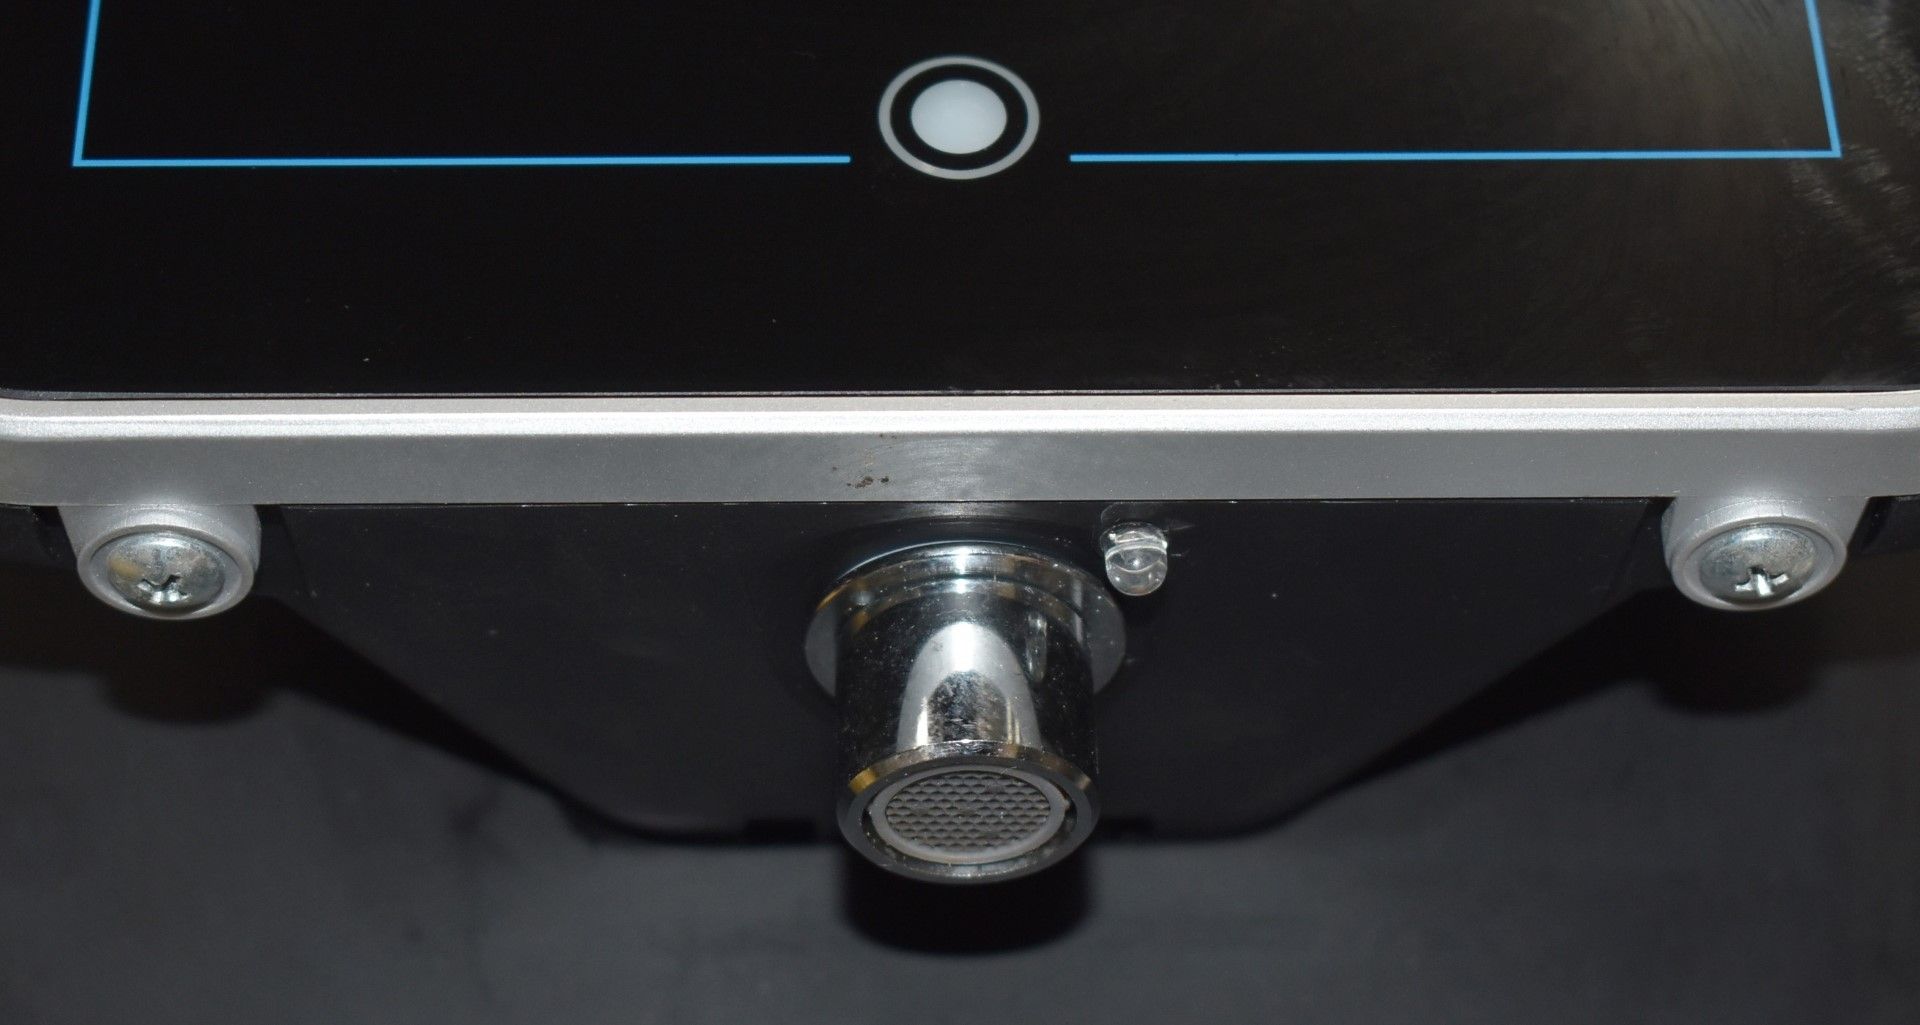 1 x Puretron Shark GA Hydrogen Countertop Filtered Water Dispenser - RRP £3,300 - Recently Removed - Image 14 of 17